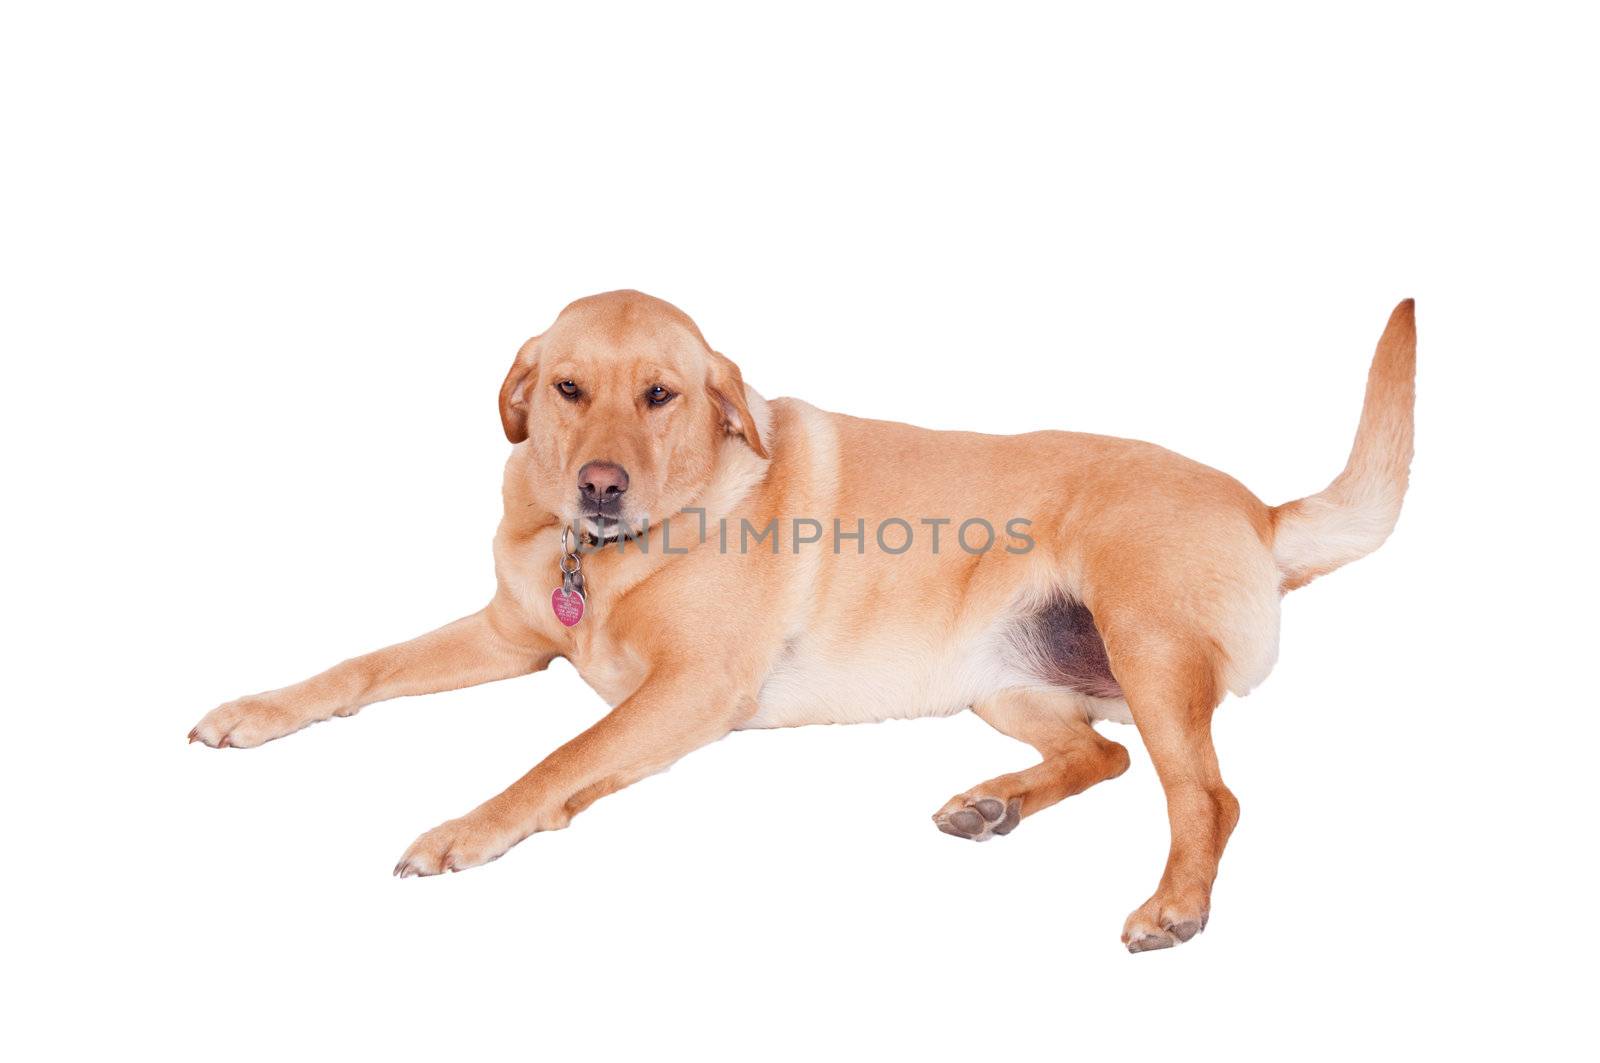 Dogs at rest on a white background by jeffbanke